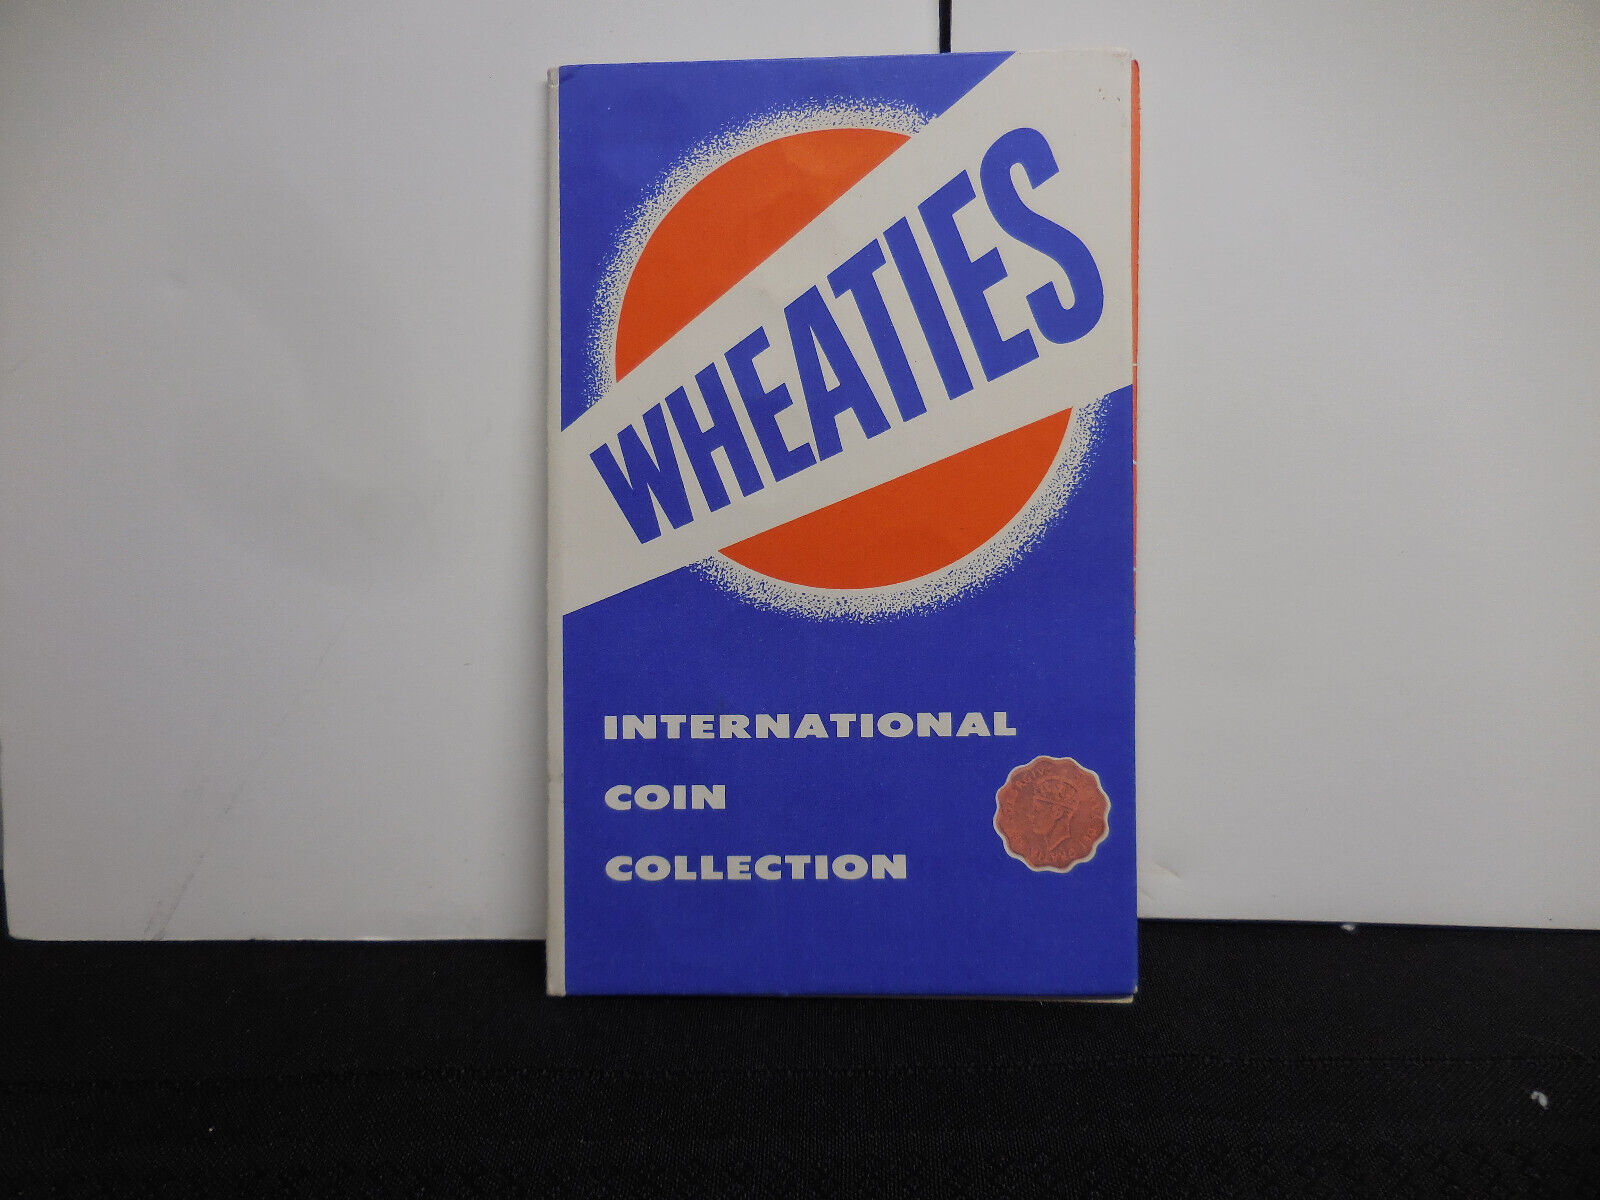 Coins, WHEATIES 1955  International Coin Collection, all coins Pre-1955